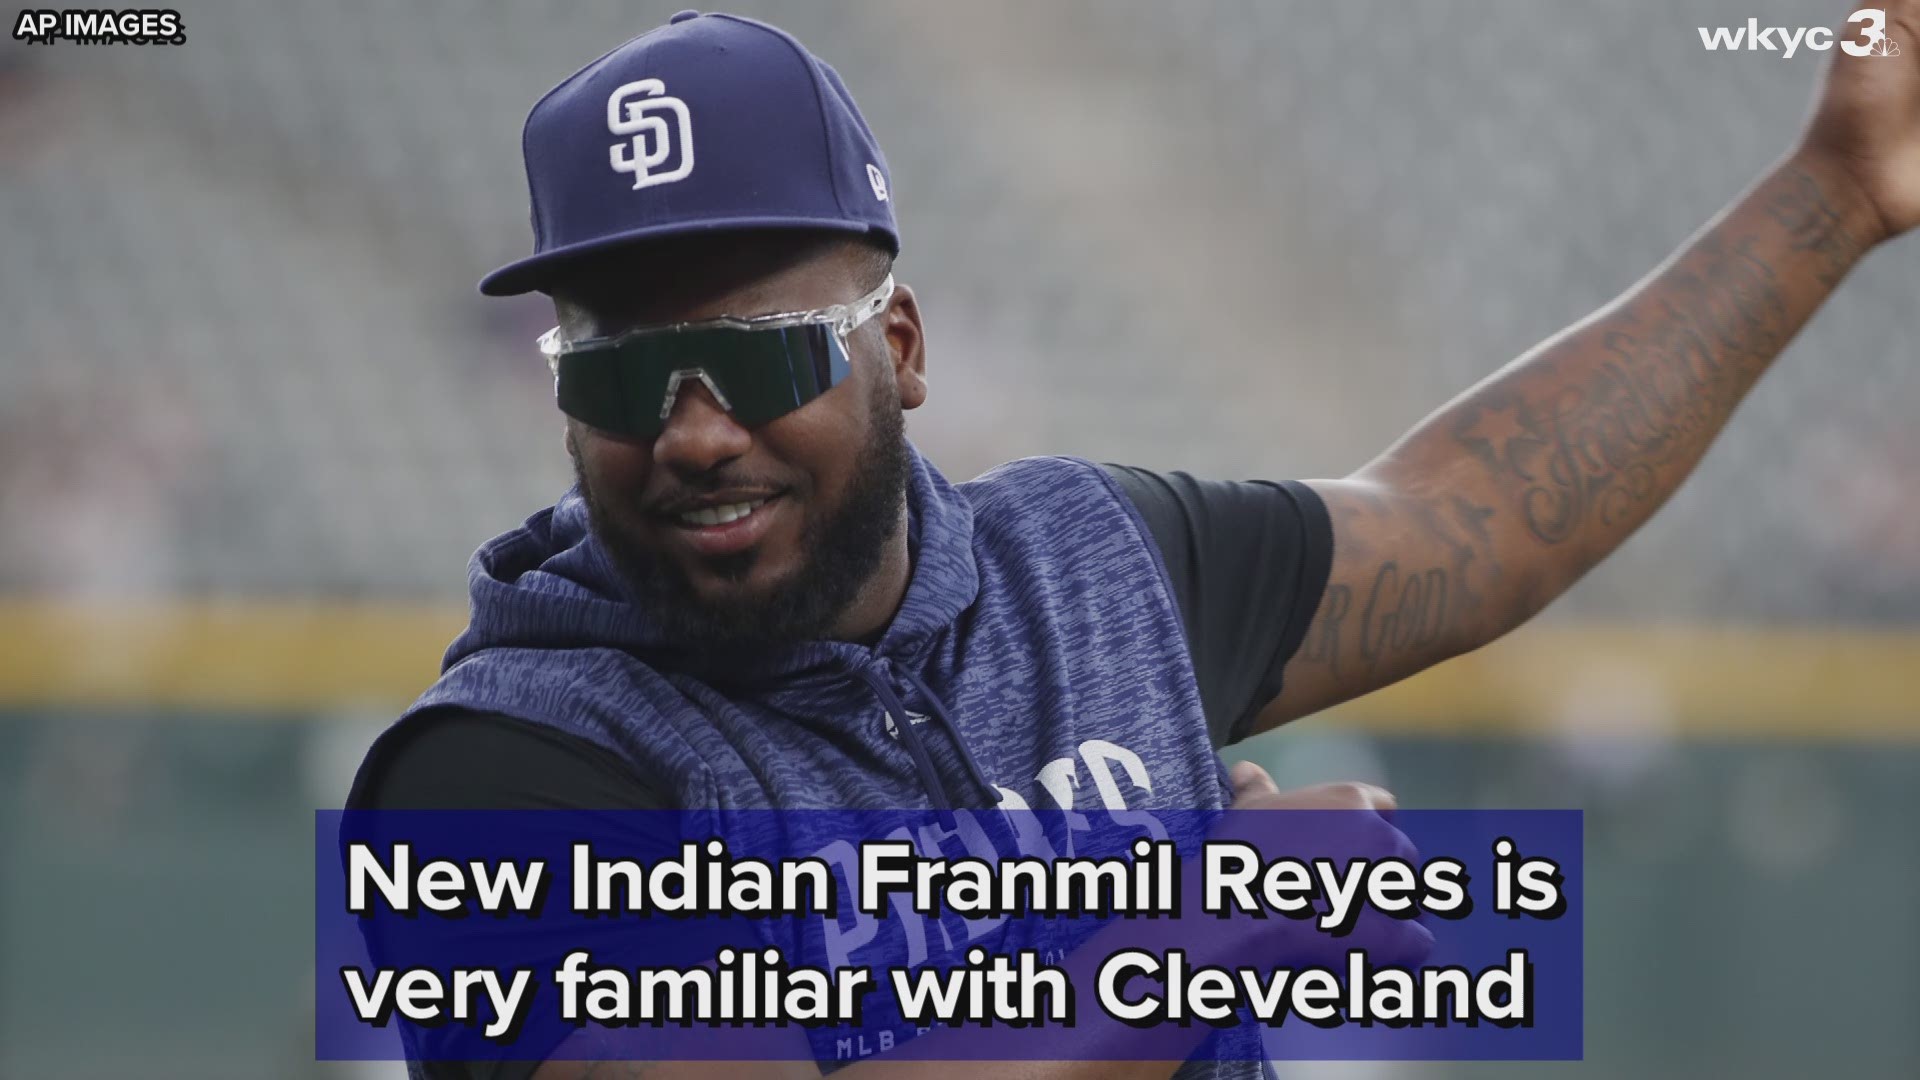 On Thursday, new Cleveland Indians designated hitter/outfielder Franmil Reyes revealed that he first met his wife in Northeast Ohio. A year later, the couple married and Reyes' baseball journey would take them from Fort Wayne to Lake Elsinore (California), San Antonio, El Paso and eventually, San Diego, where he made his big league debut in 2018.